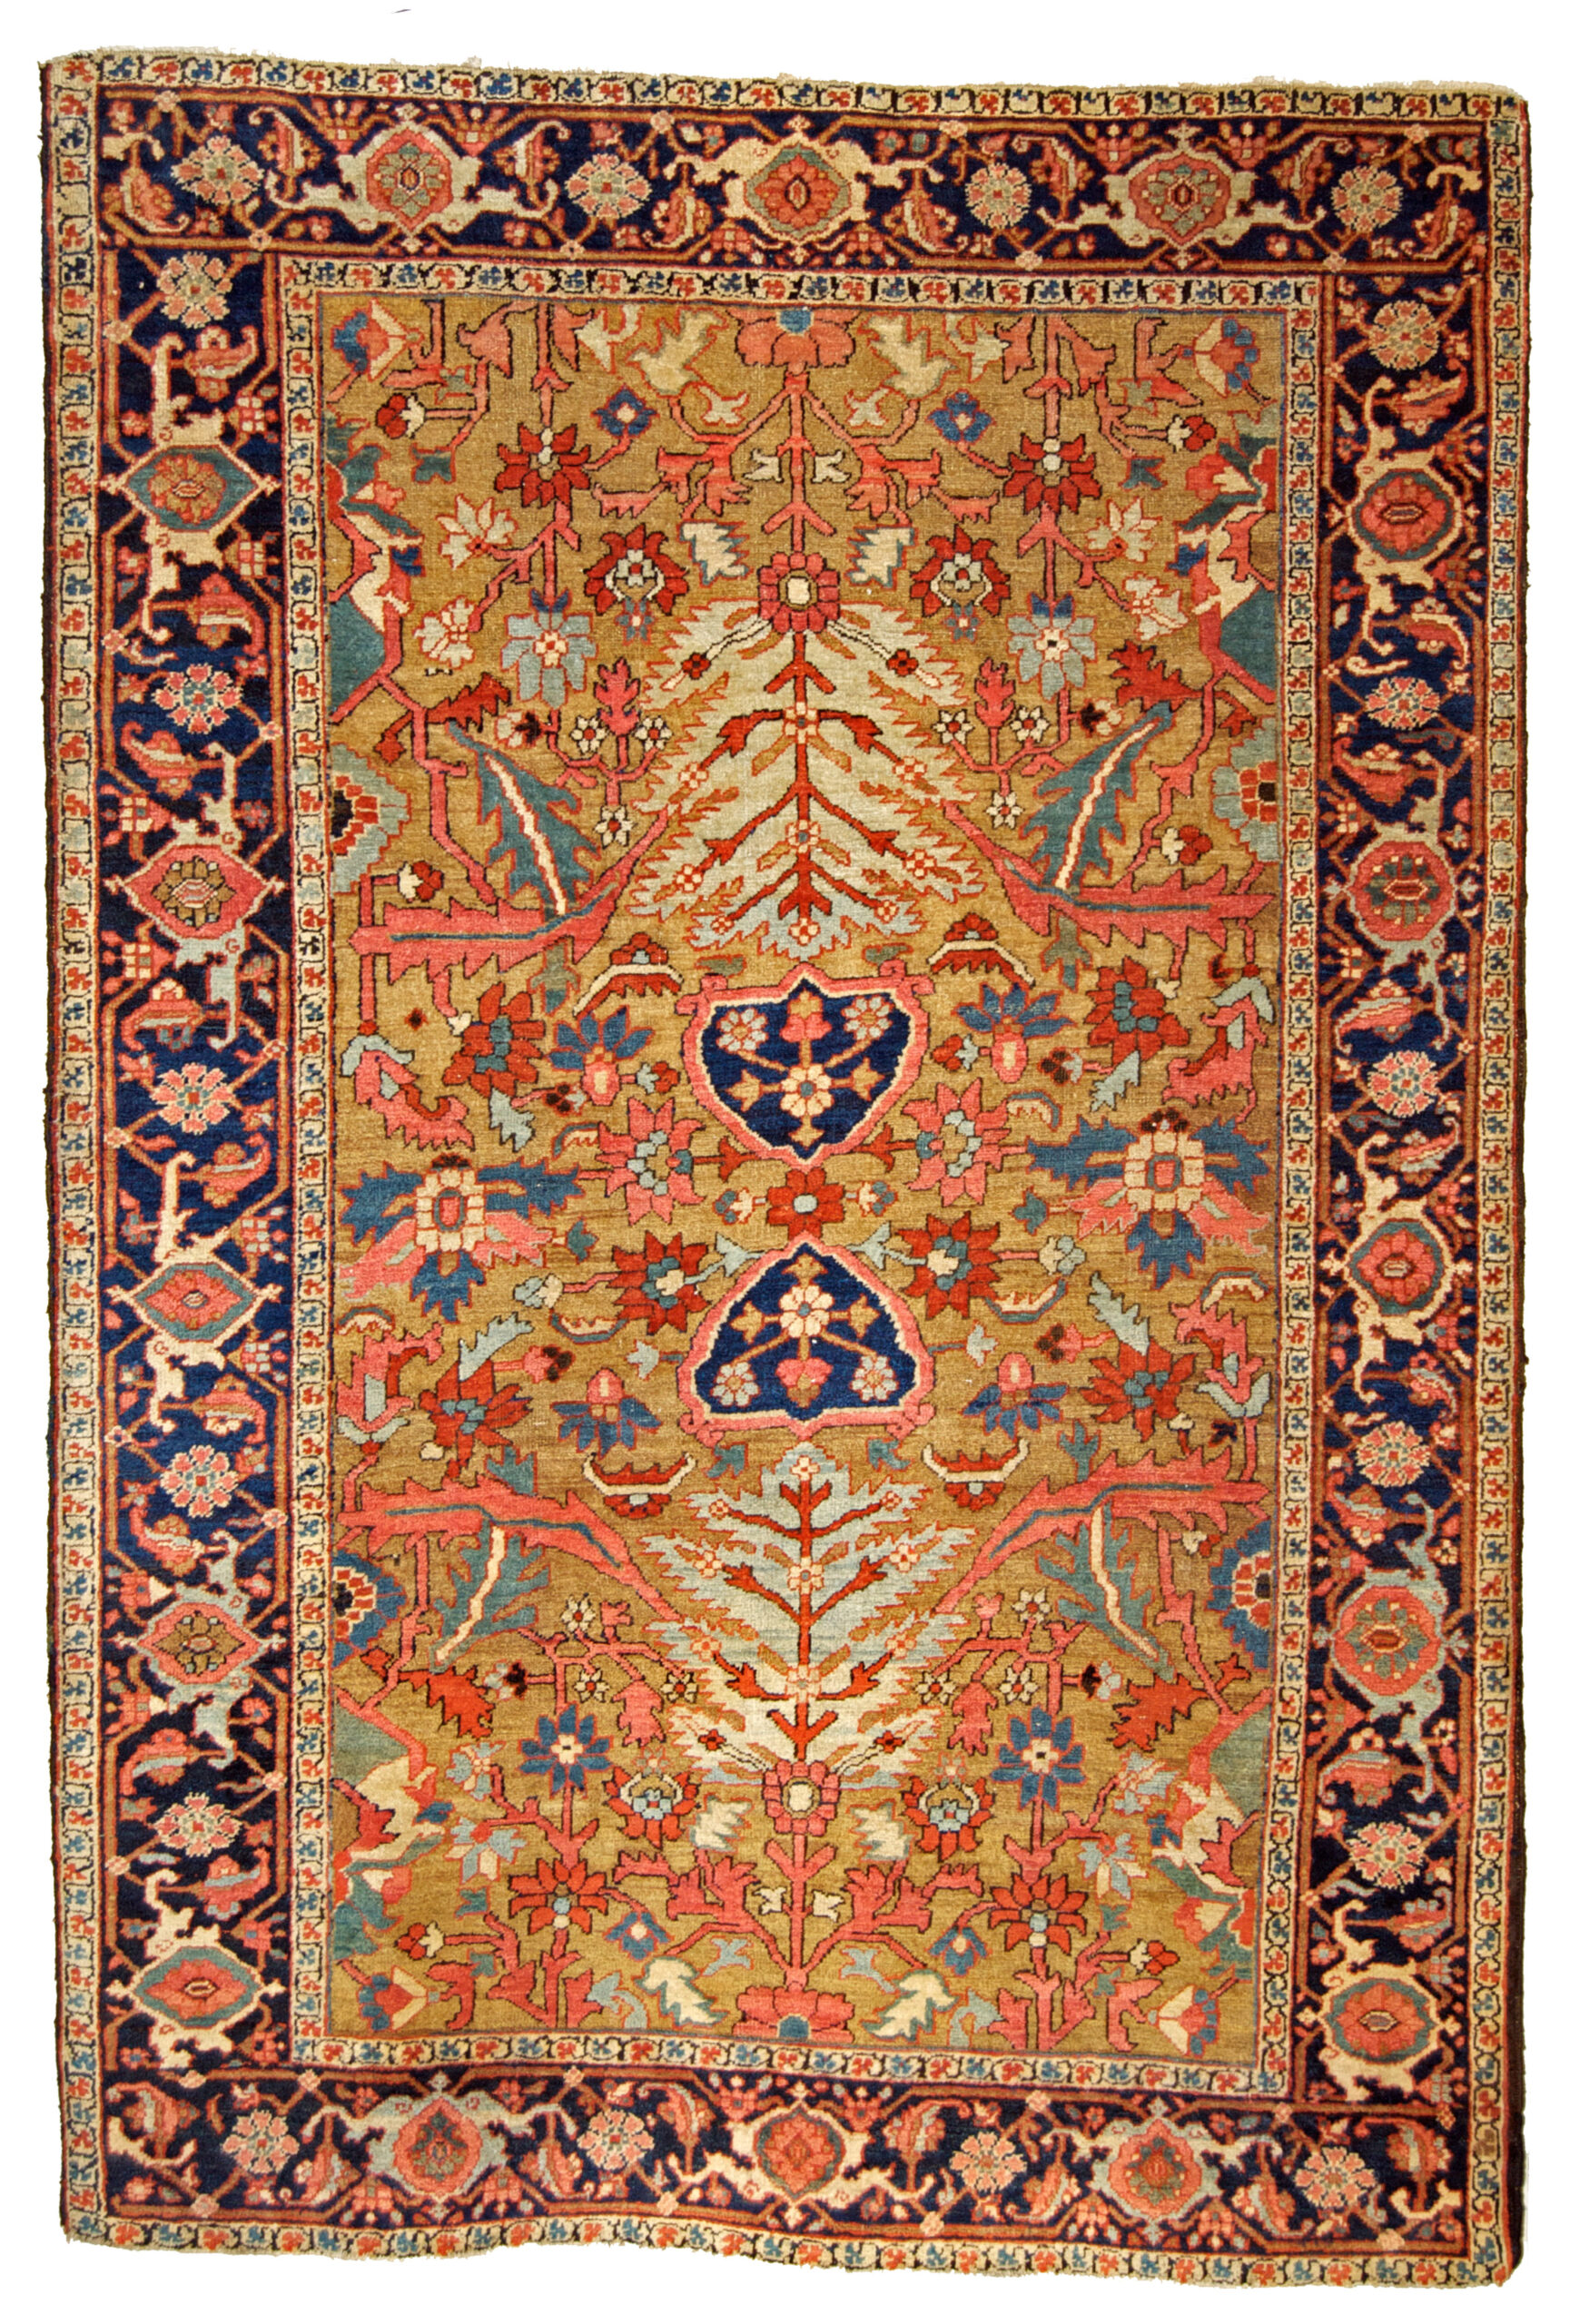 Antique northwest Persian Heriz Serapi rug with a yellow-camel field and an all-over design, circa 1890